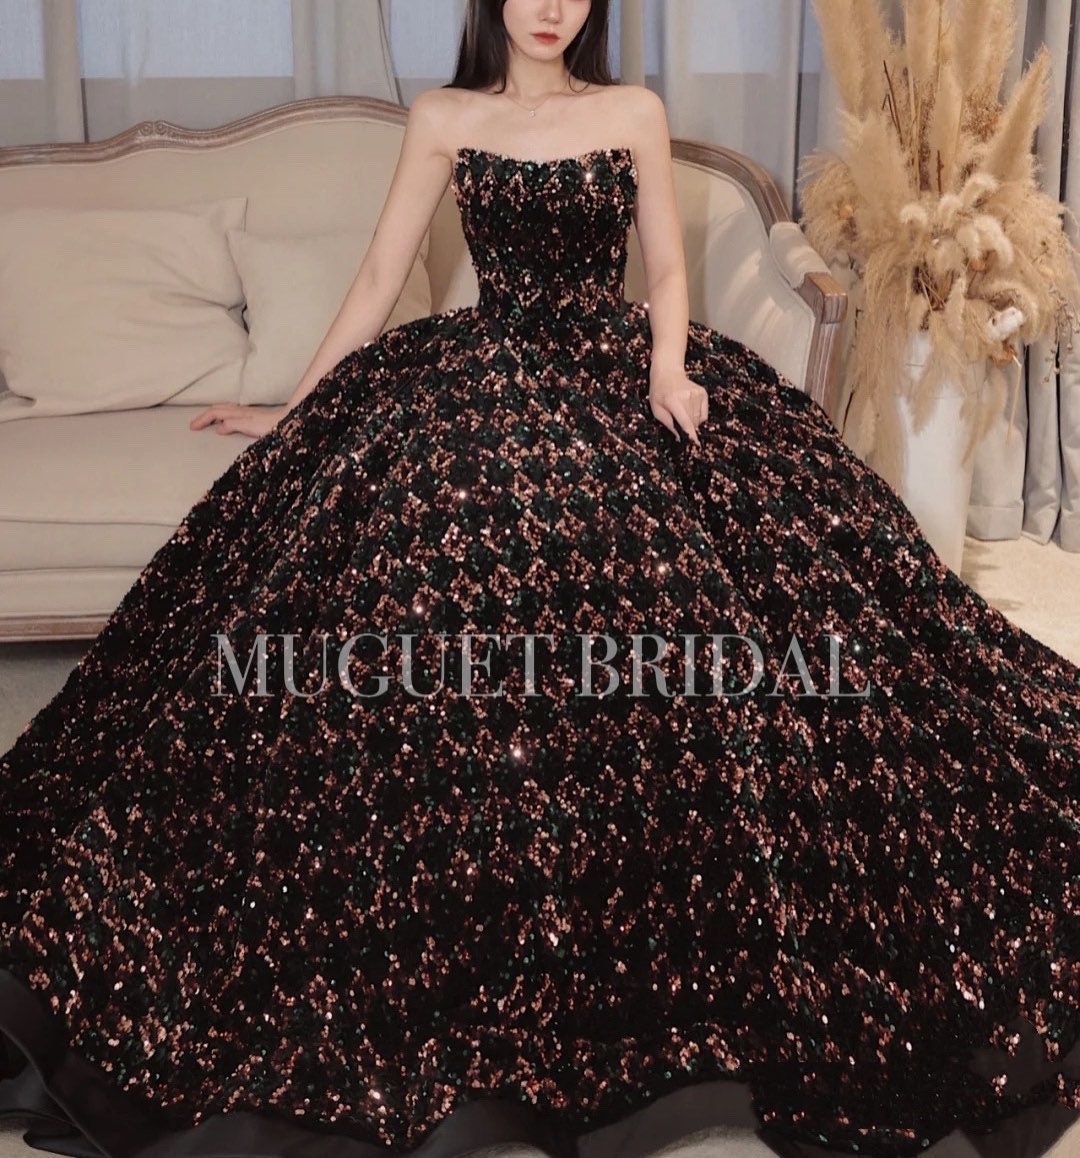 Long Sleeve Mermaid Lace Prom Dresses With Sleeves In Black For Formal  Events Plus Size Available From Forevergrace, $202.8 | DHgate.Com